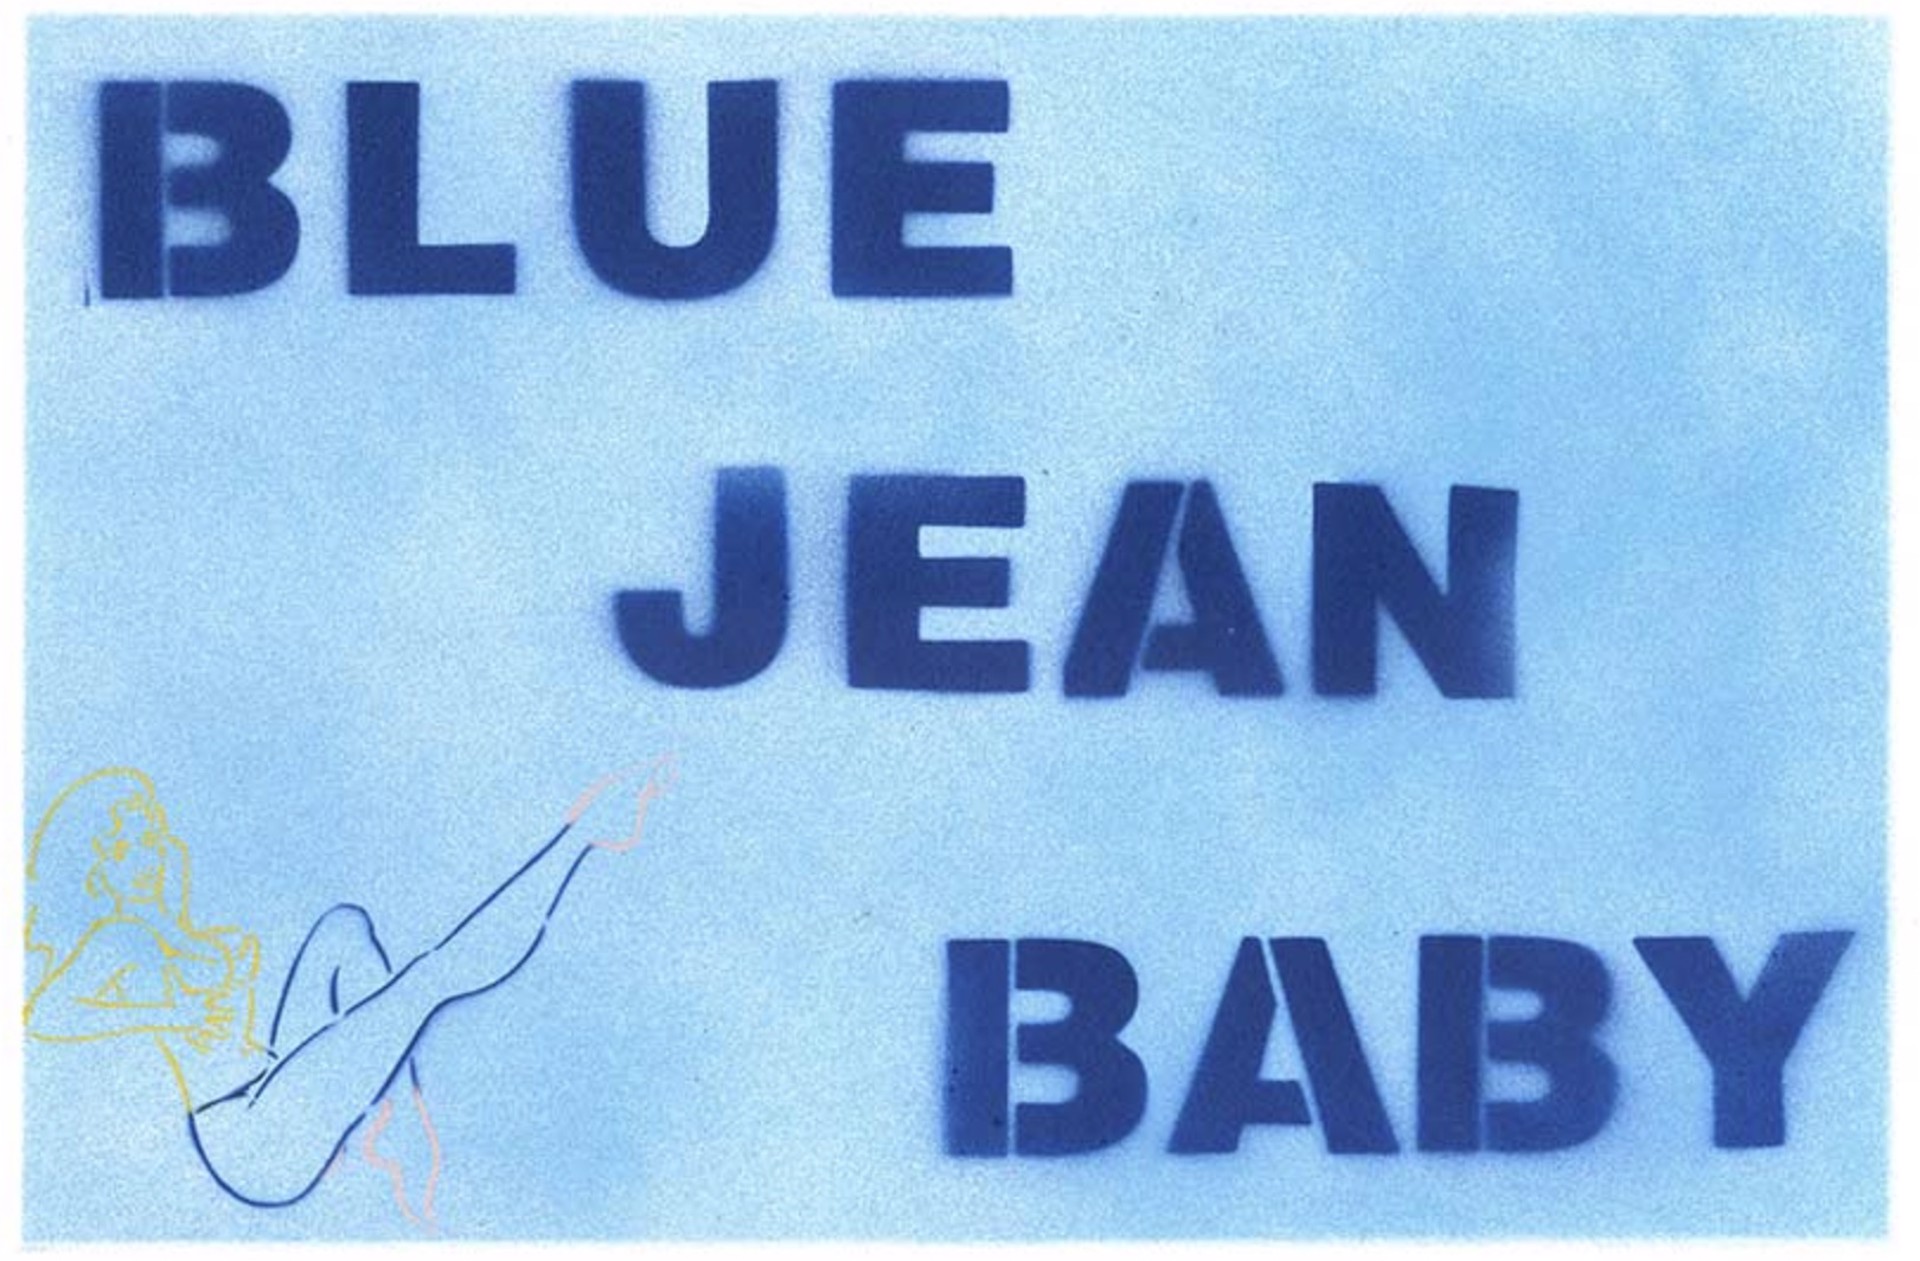 Blue Jeans Baby by Bernie Taupin